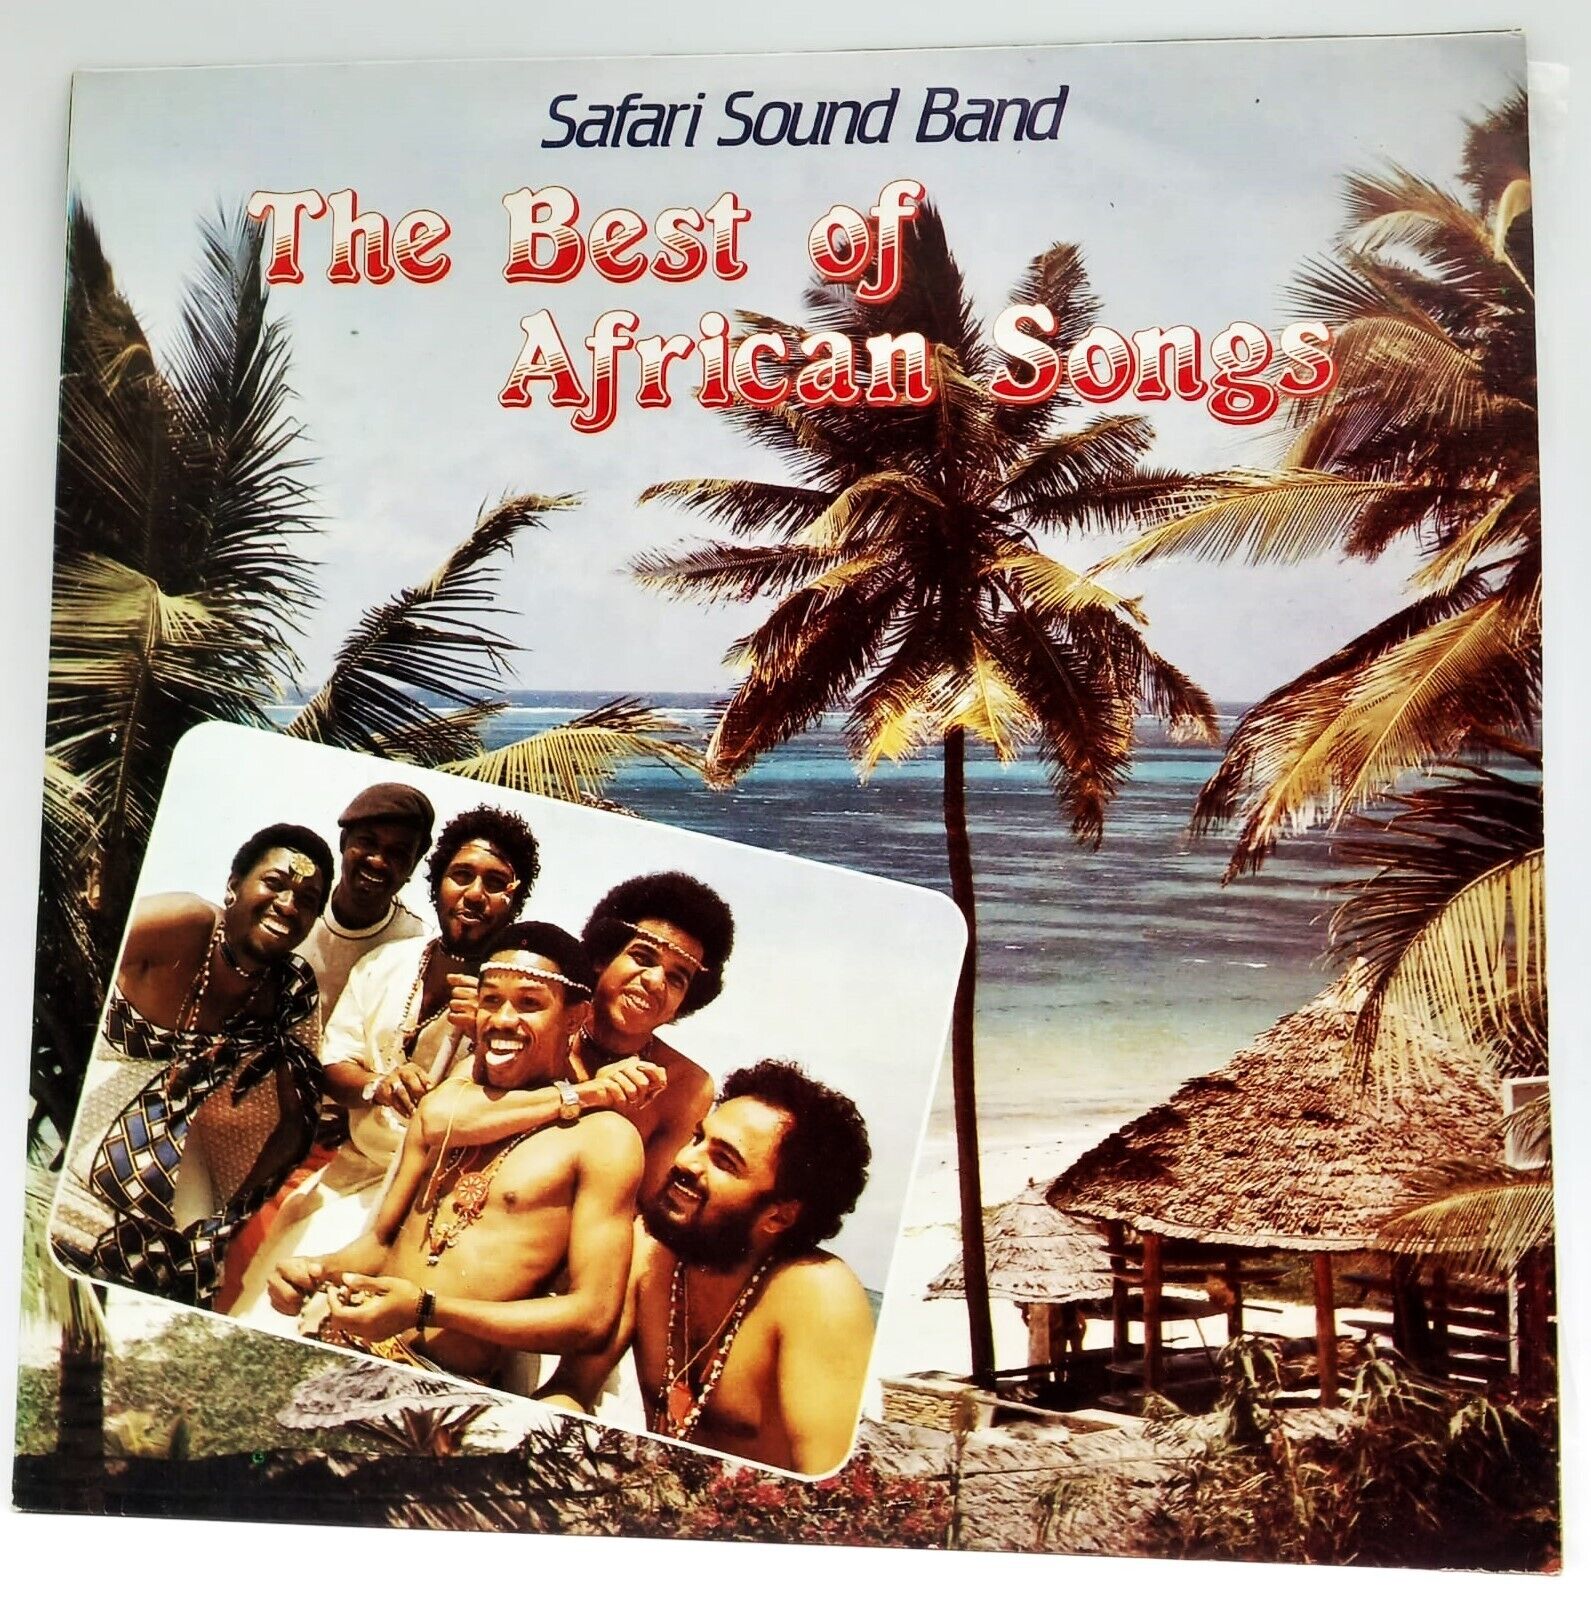 lp SAFARI SOUND BAND The Best Of African Songs 1984 NM / EX Polydor Kenya